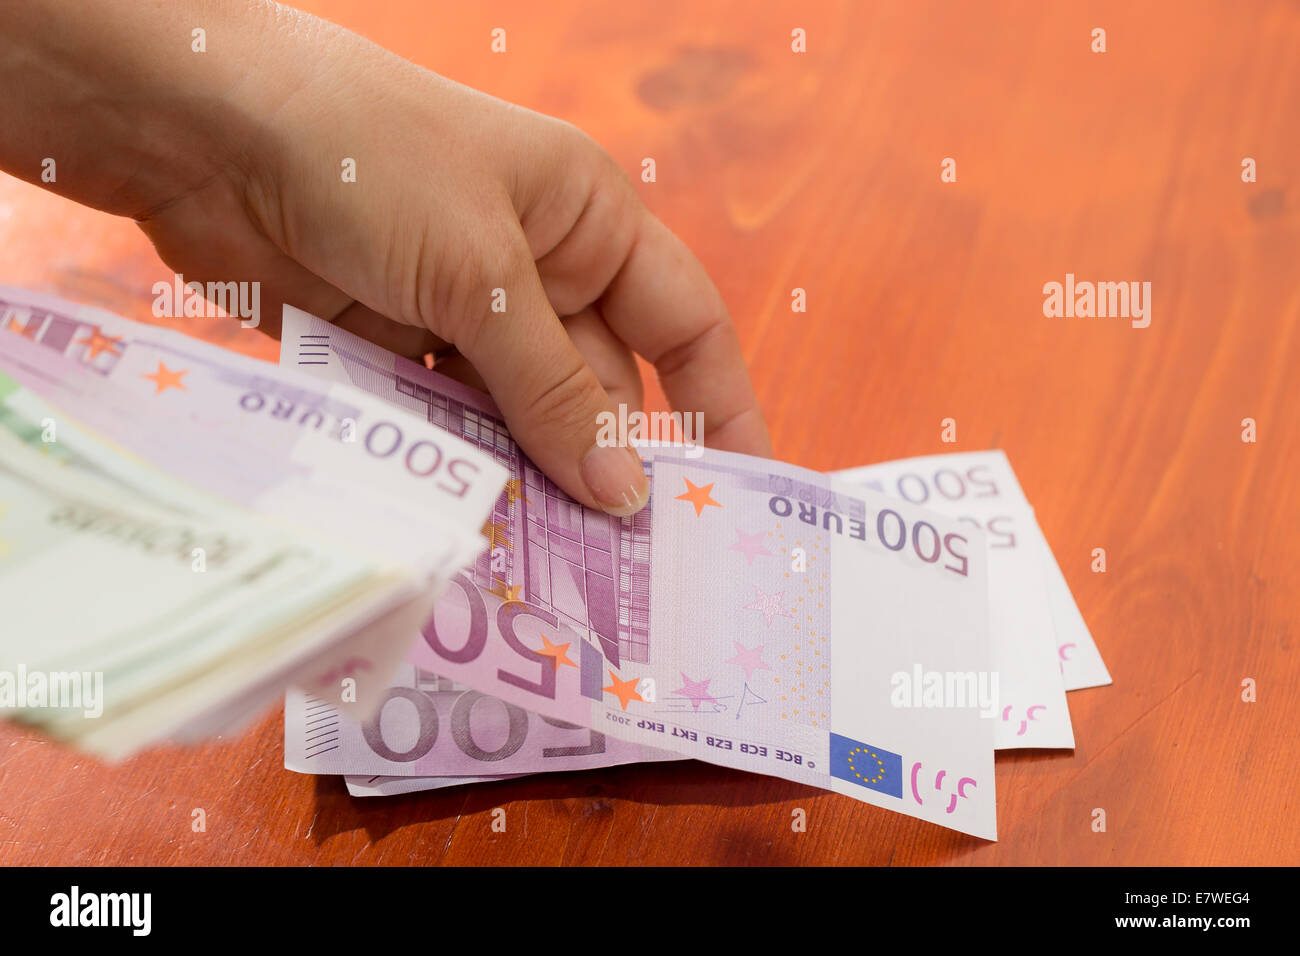 woman counting EUR banknotes Stock Photo